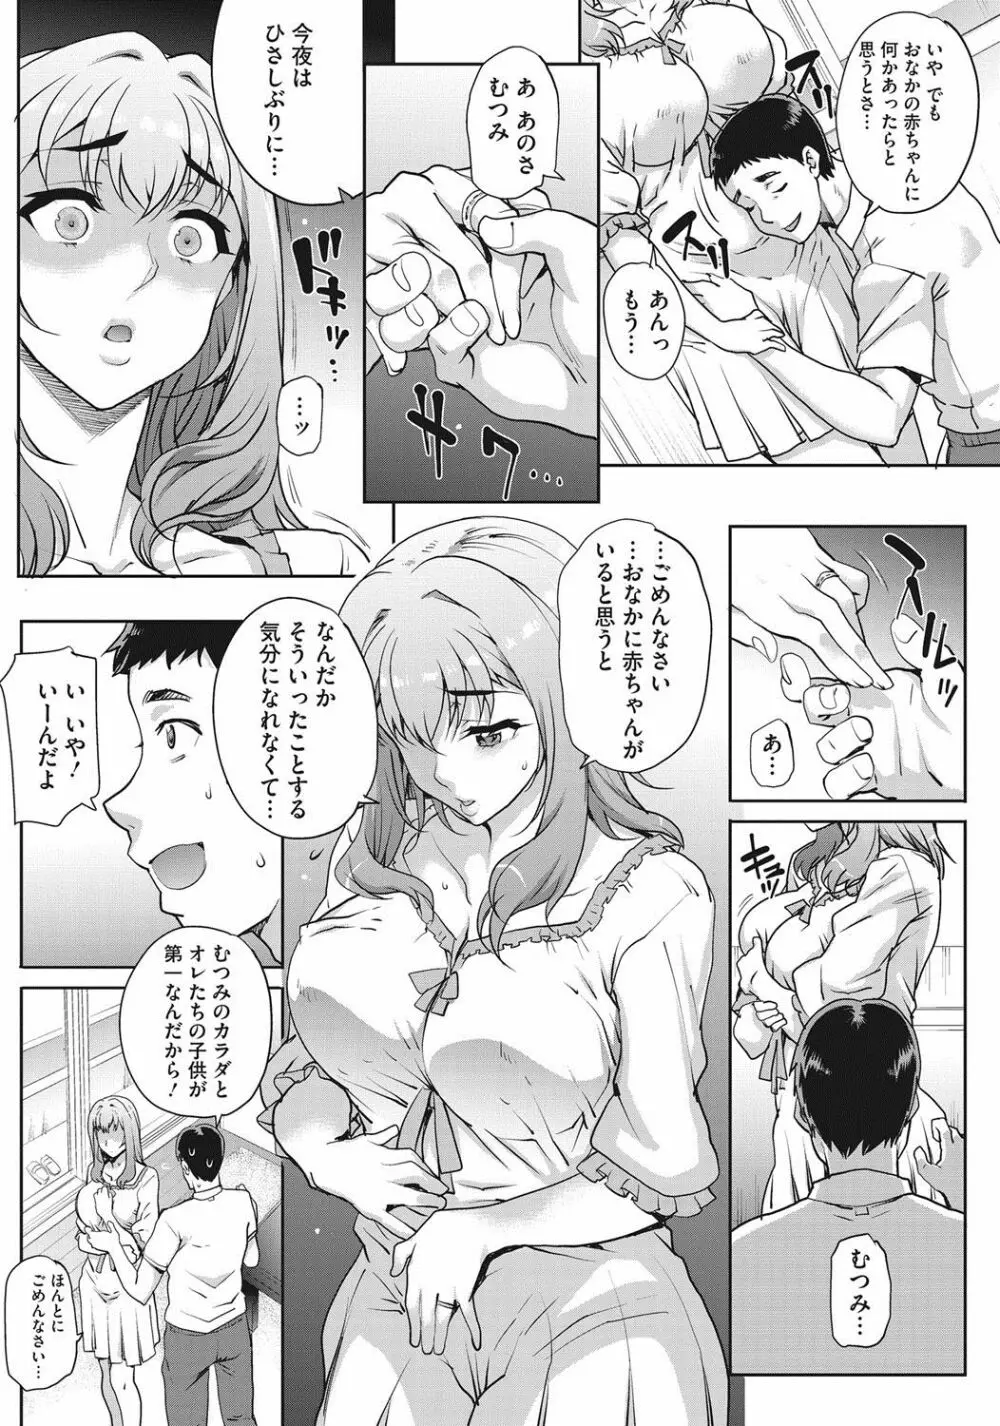 [Carn] Tanshinfunin ~Sisters~ Ch 1-7 78ページ